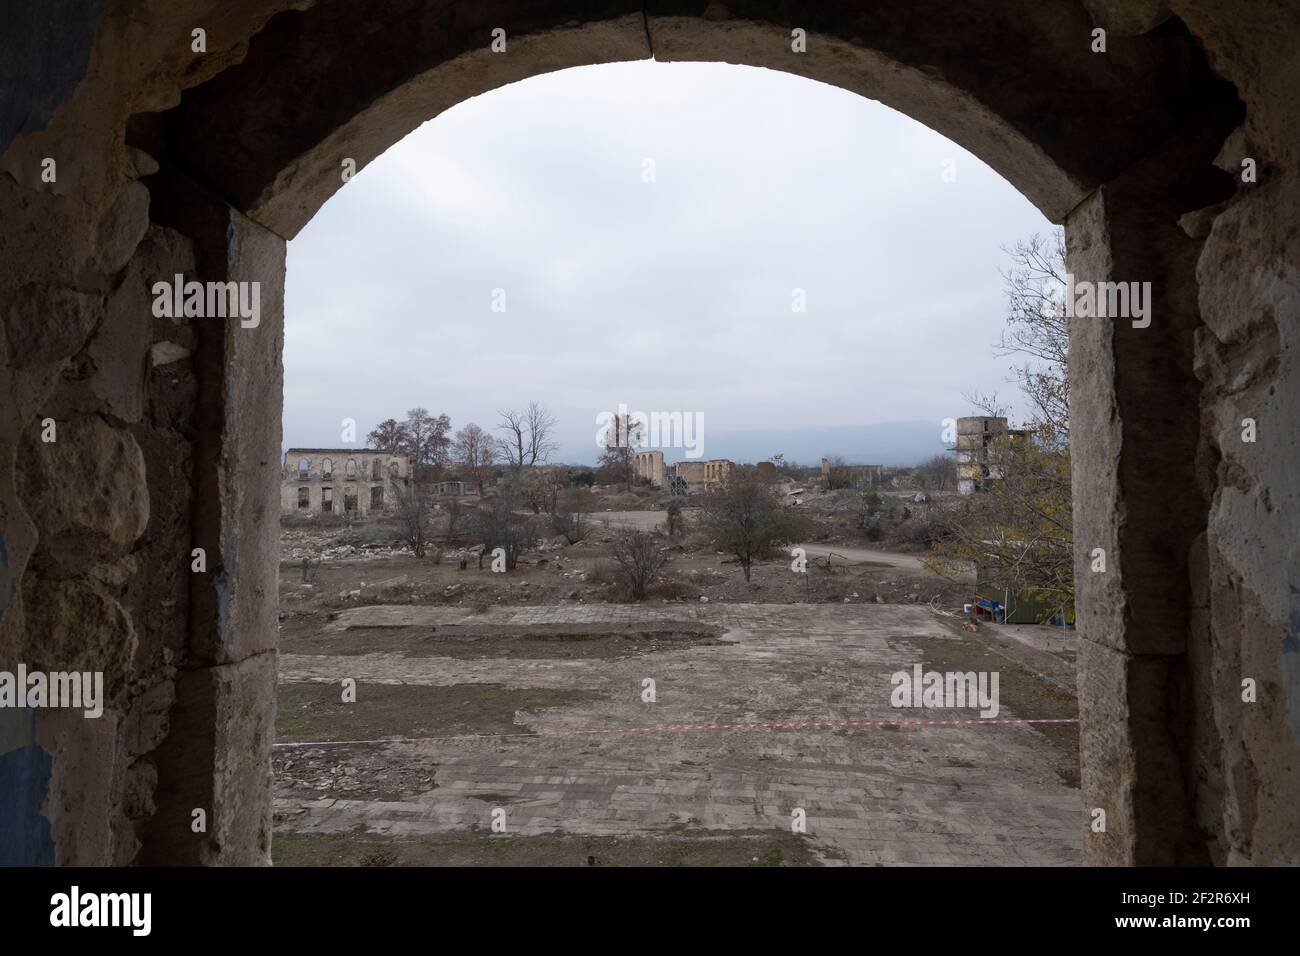 AGDAM, AZERBAIJAN - DECEMBER 14: View through the19th century Juma Mosque the only building left standing in the town of Agdam which was destroyed by Armenian forces during the First Nagorno-Karabakh War on December 14, 2020 in Agdam, Azerbaijan. The town and its surrounding district were returned to Azerbaijani control as part of an agreement that ended the 2020 Nagorno-Karabakh War. Stock Photo